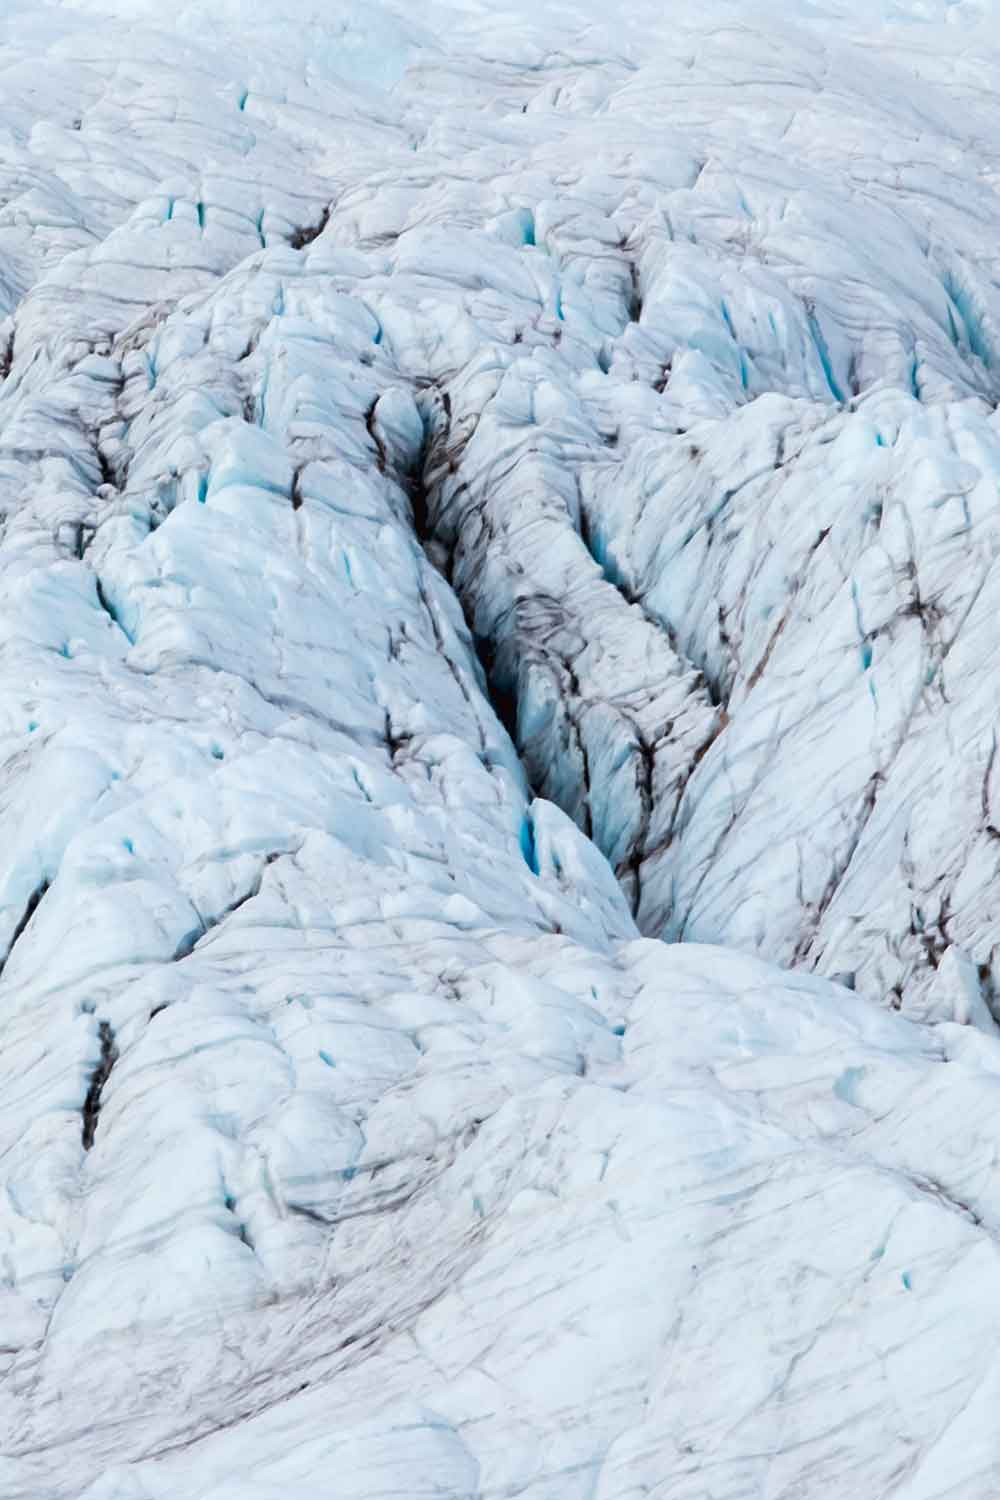 Frozen Majesty – Kangerlussuaq Ice Cap reveals its majestic allure on an immersive camping journey